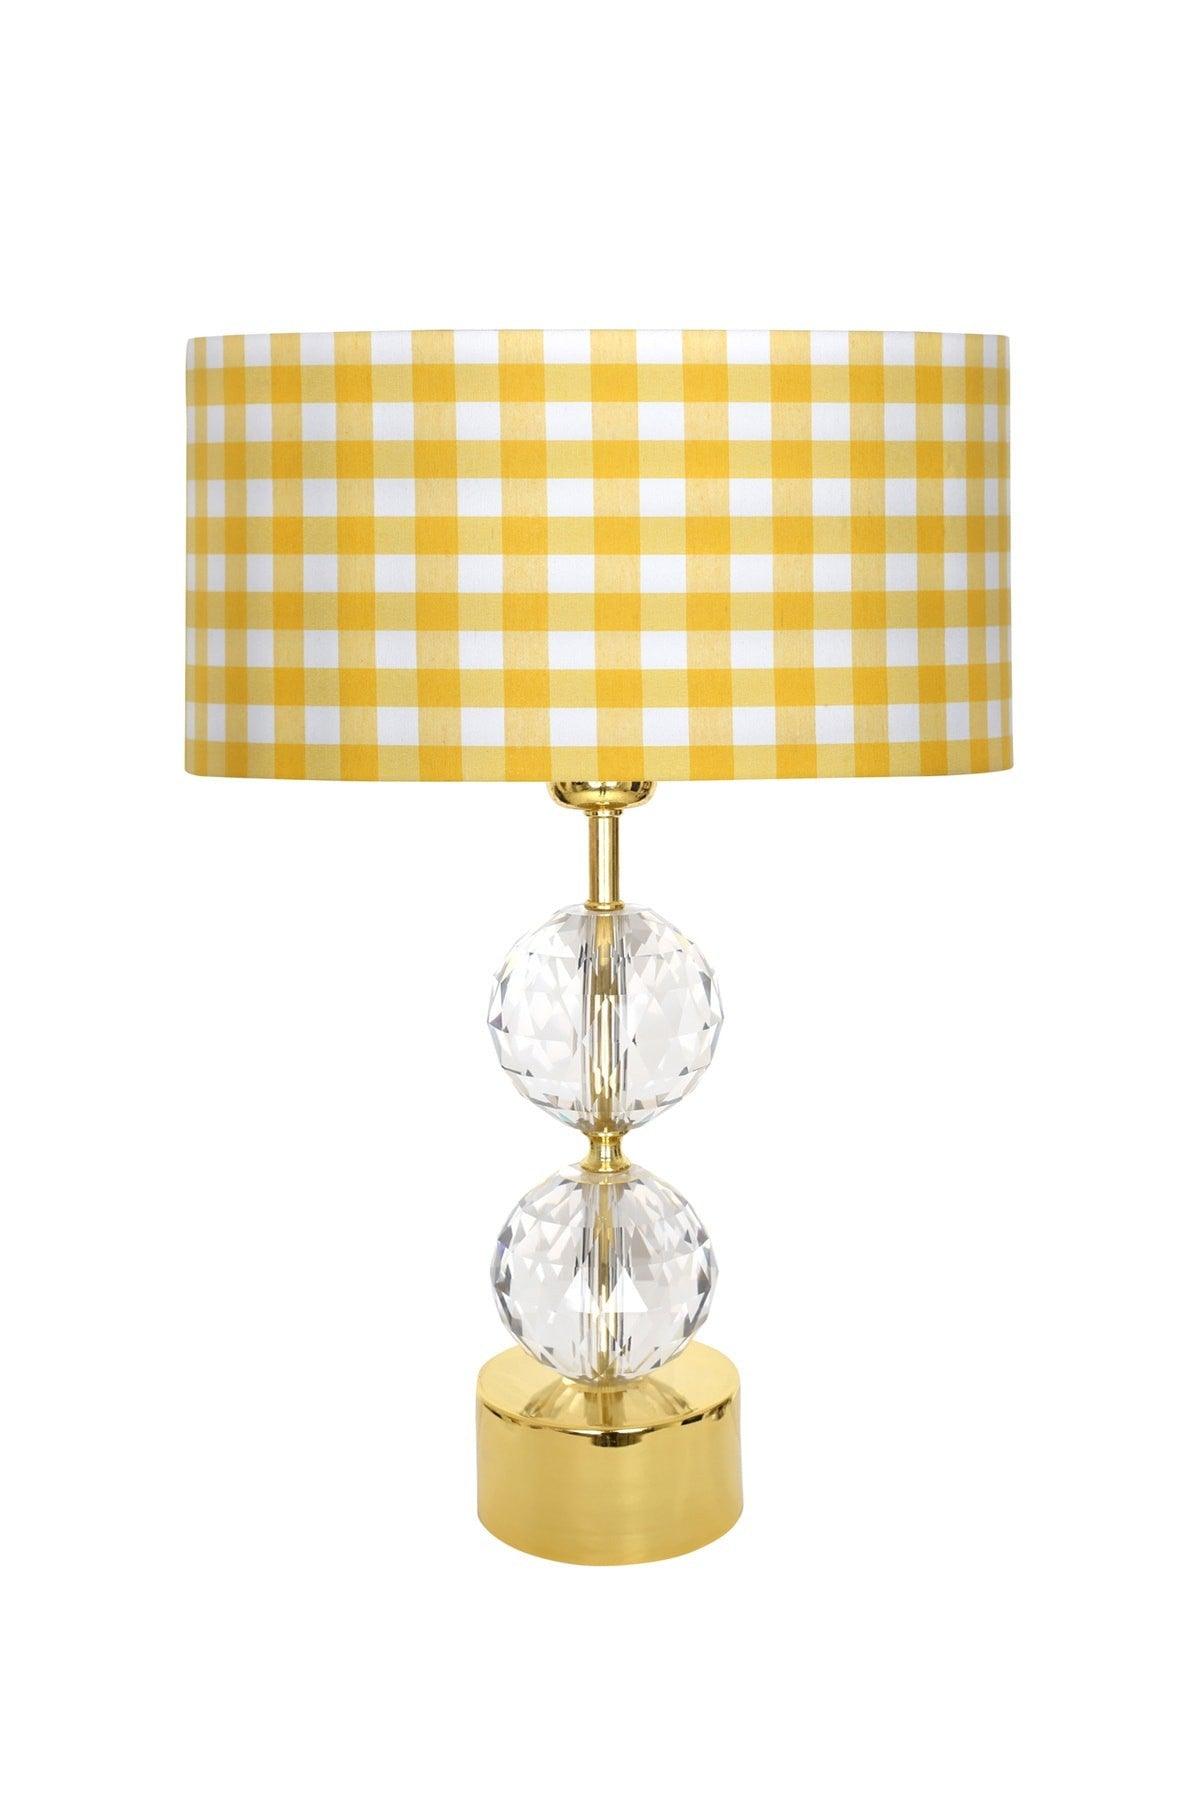 Gld-krs01 Gold Footed Crystal Lampshade - Yellow Plaid - Swordslife